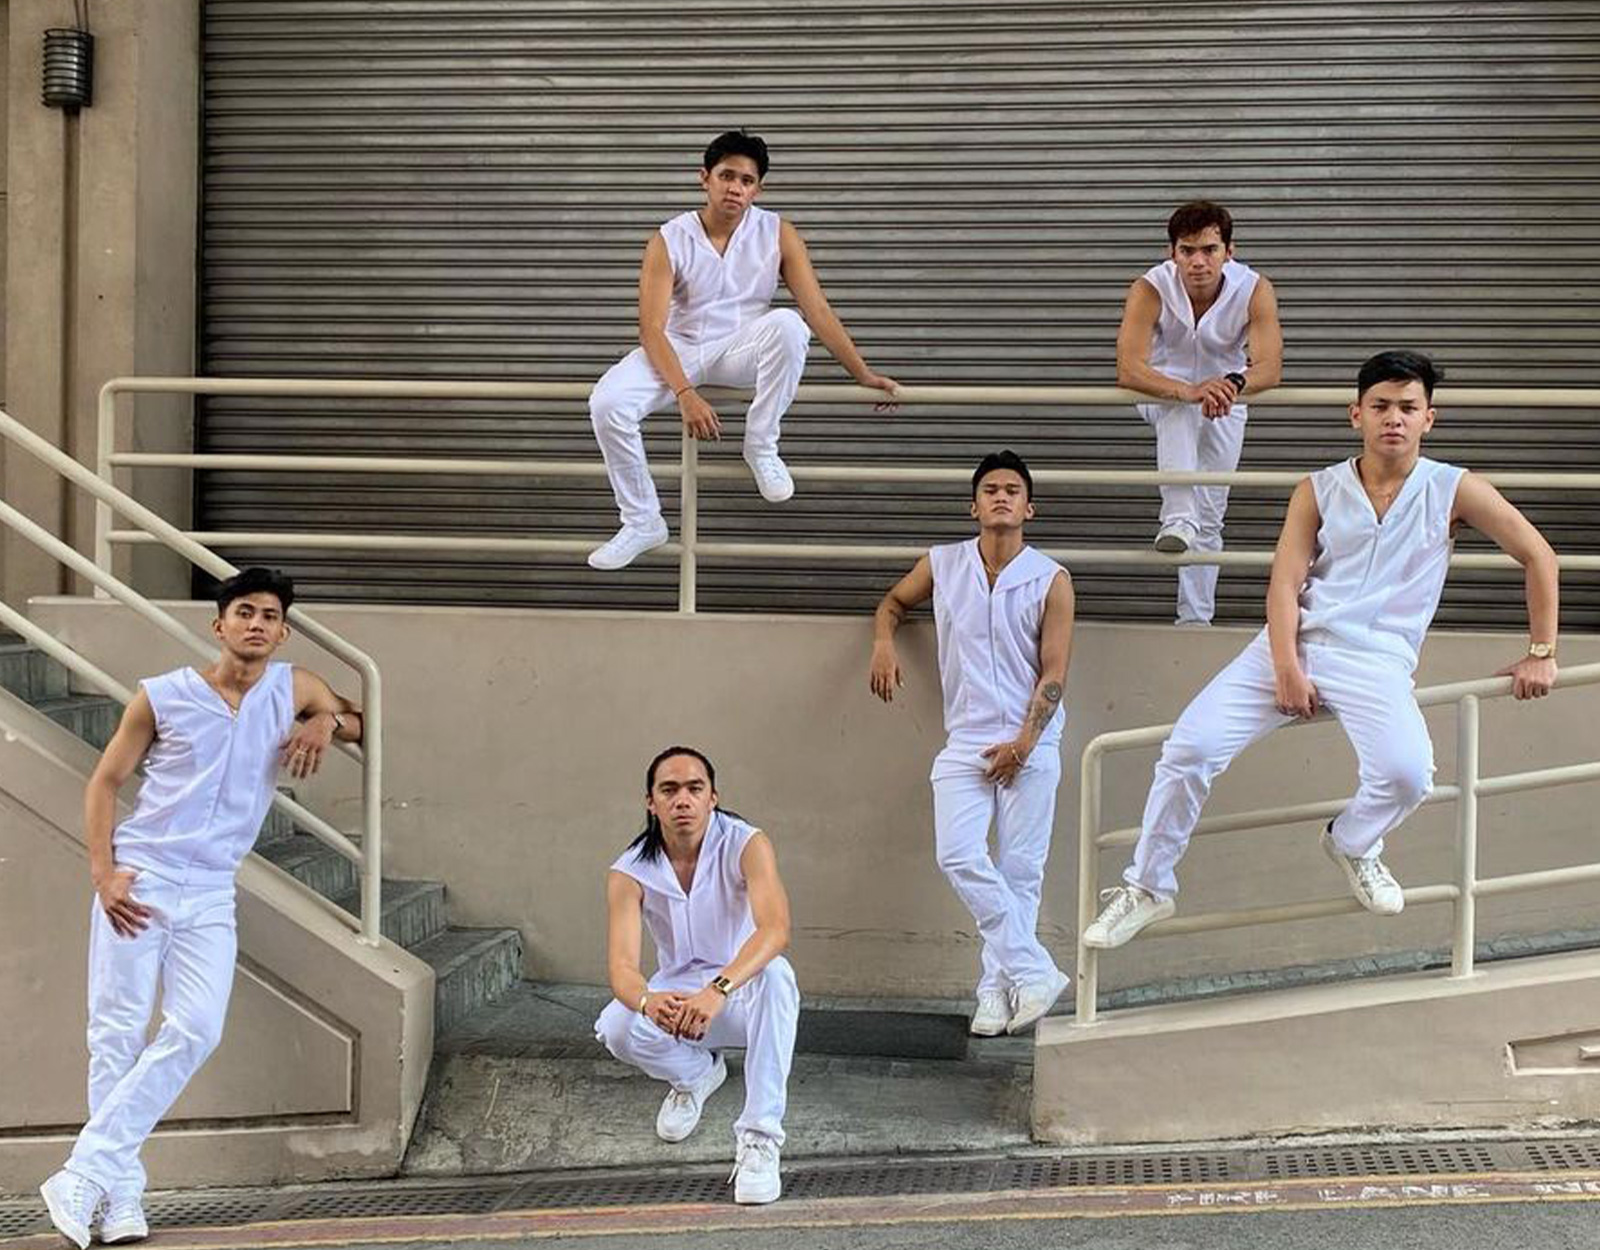 Another Popular Filipino 90s Dance Group was Manouevres